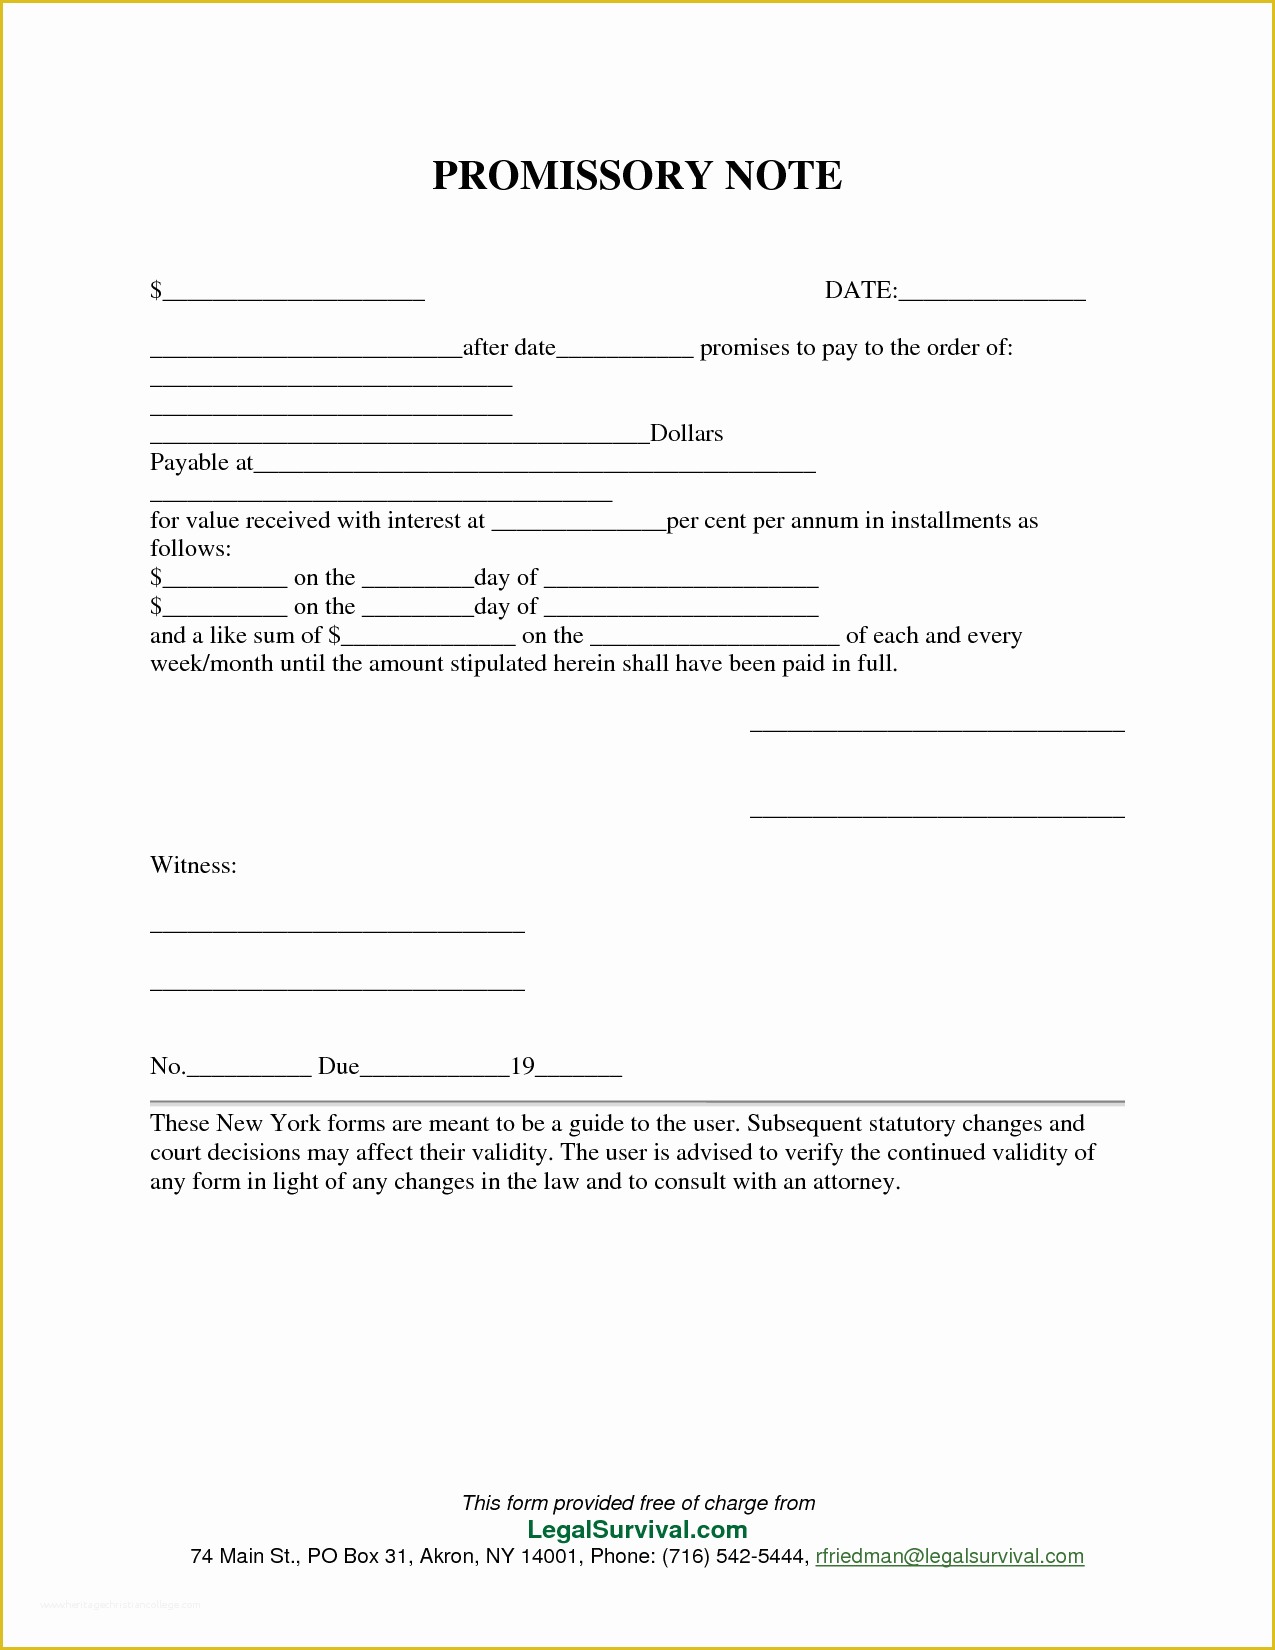 Free Promissory Note Template Illinois Of Permalink to Free Promissory Note Template …